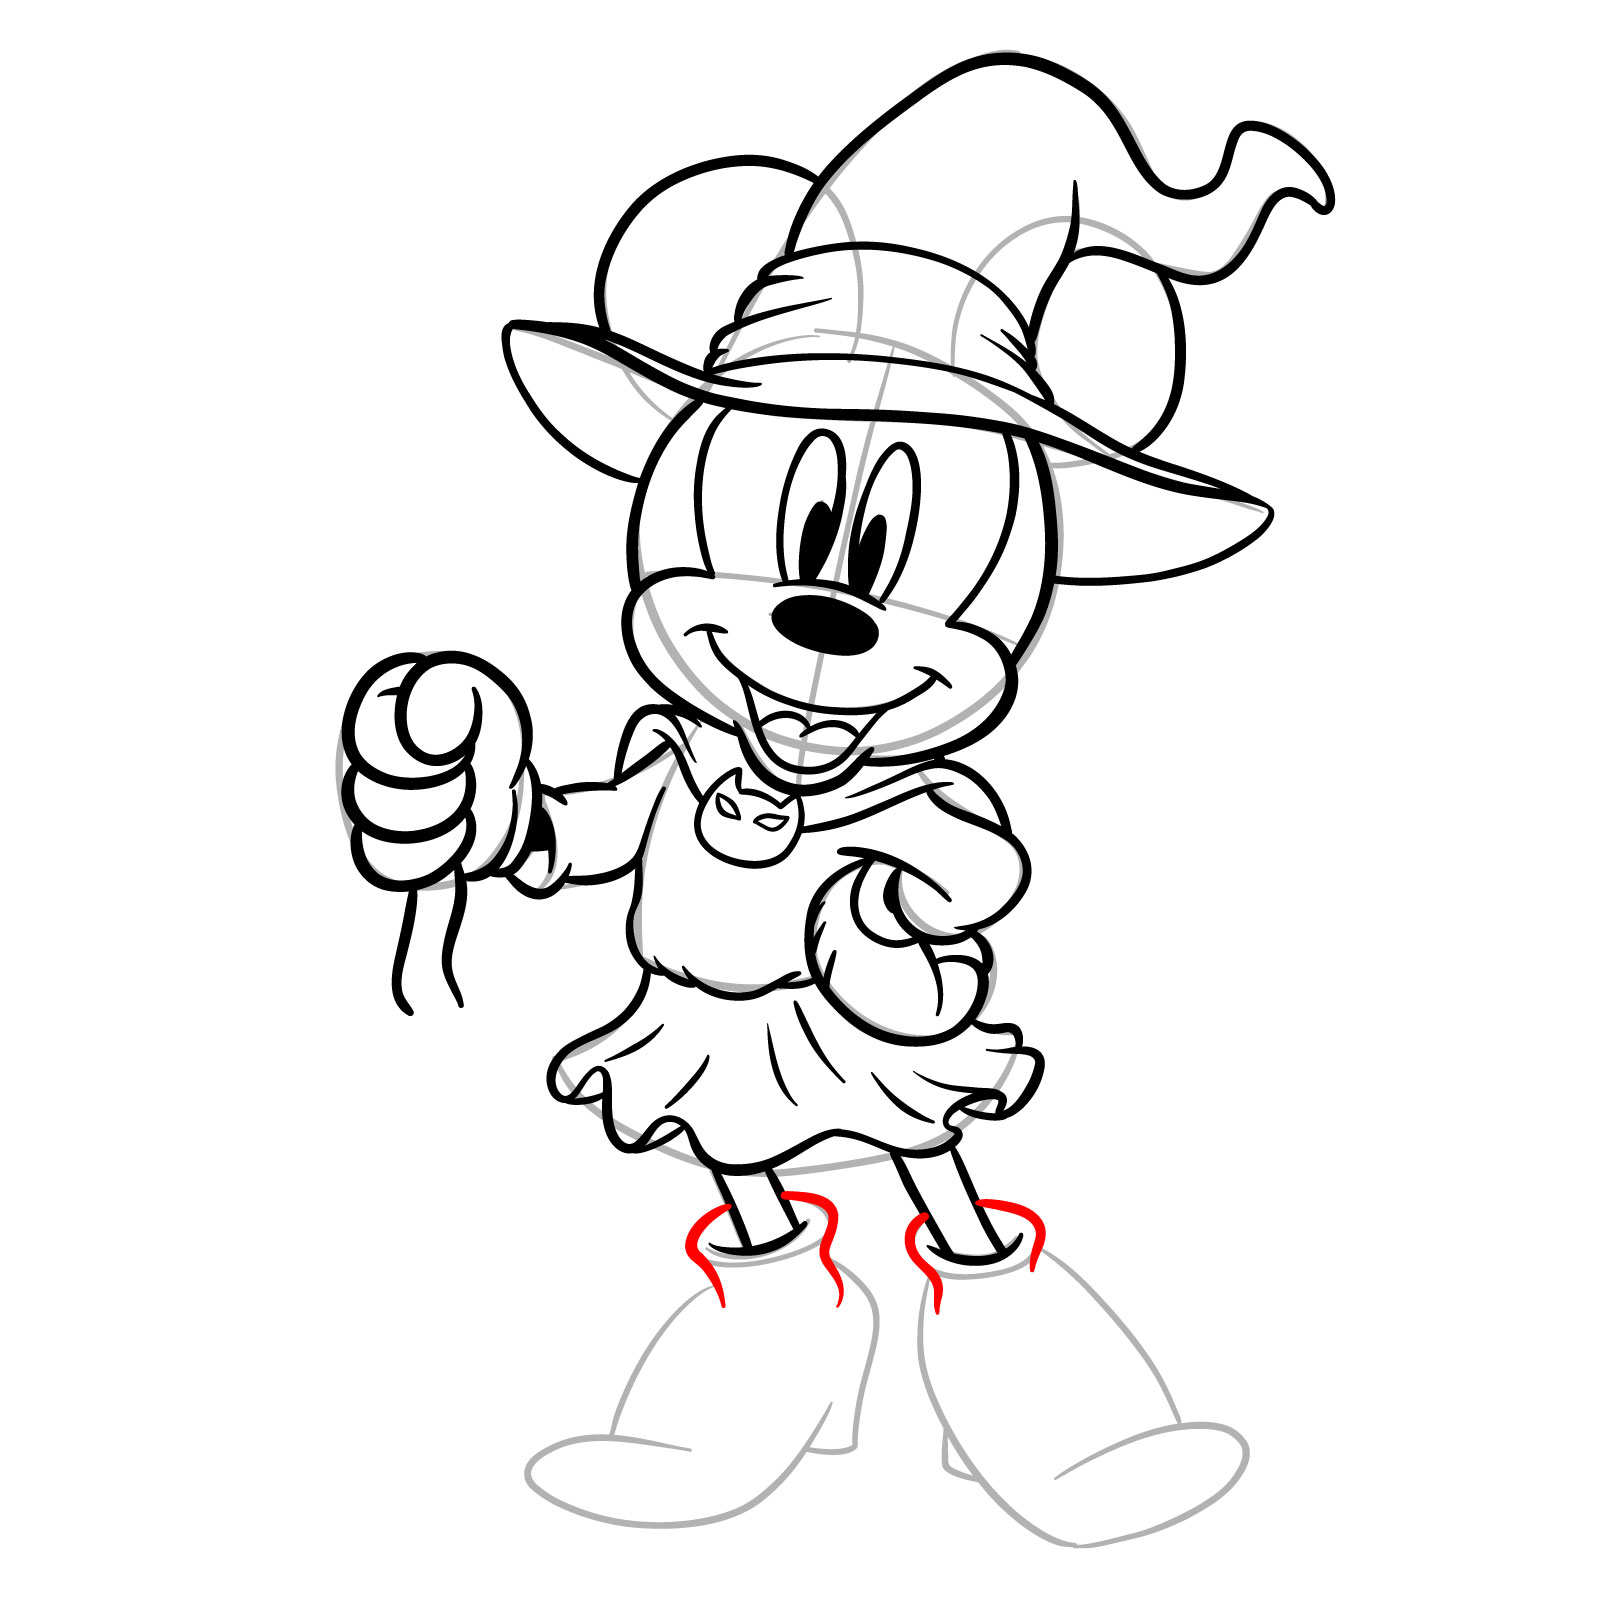 How to draw Halloween Minnie Mouse as a witch - step 26